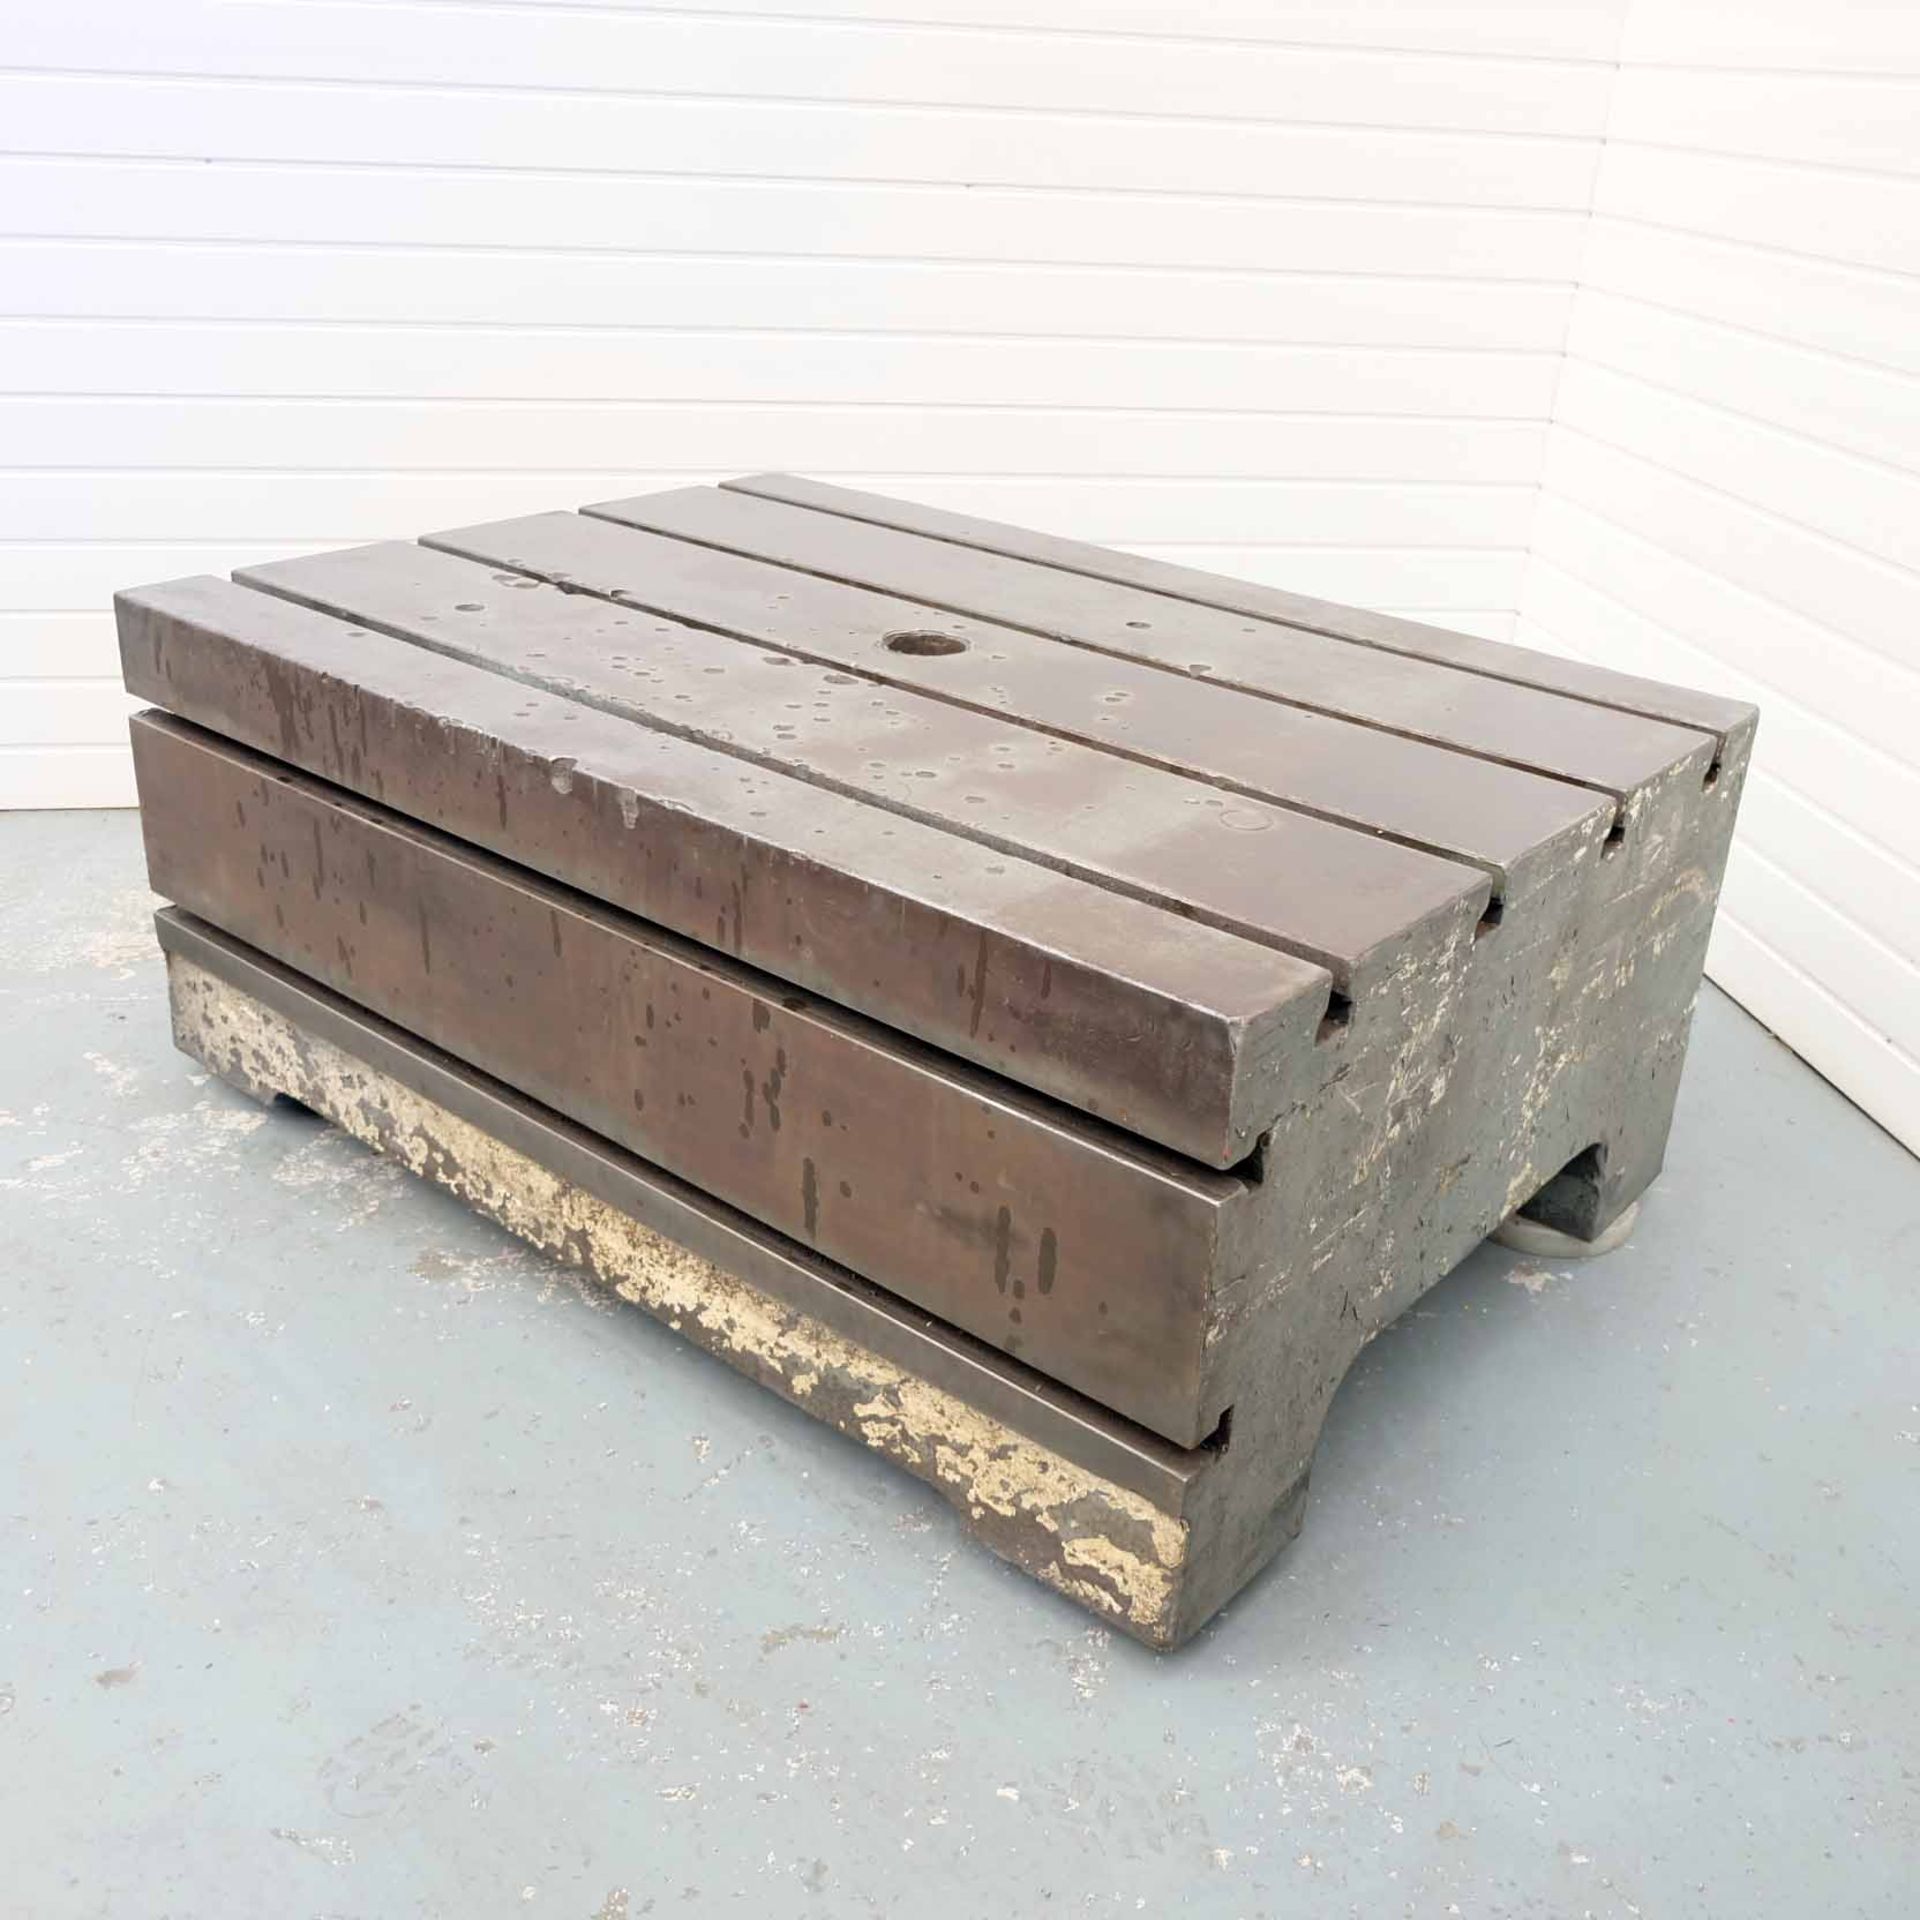 Tee Slotted Box Table. Size 51" x 36" x 20" High. 4 Tee Slots on Top. 2 Tee Slots on Front. - Image 2 of 4